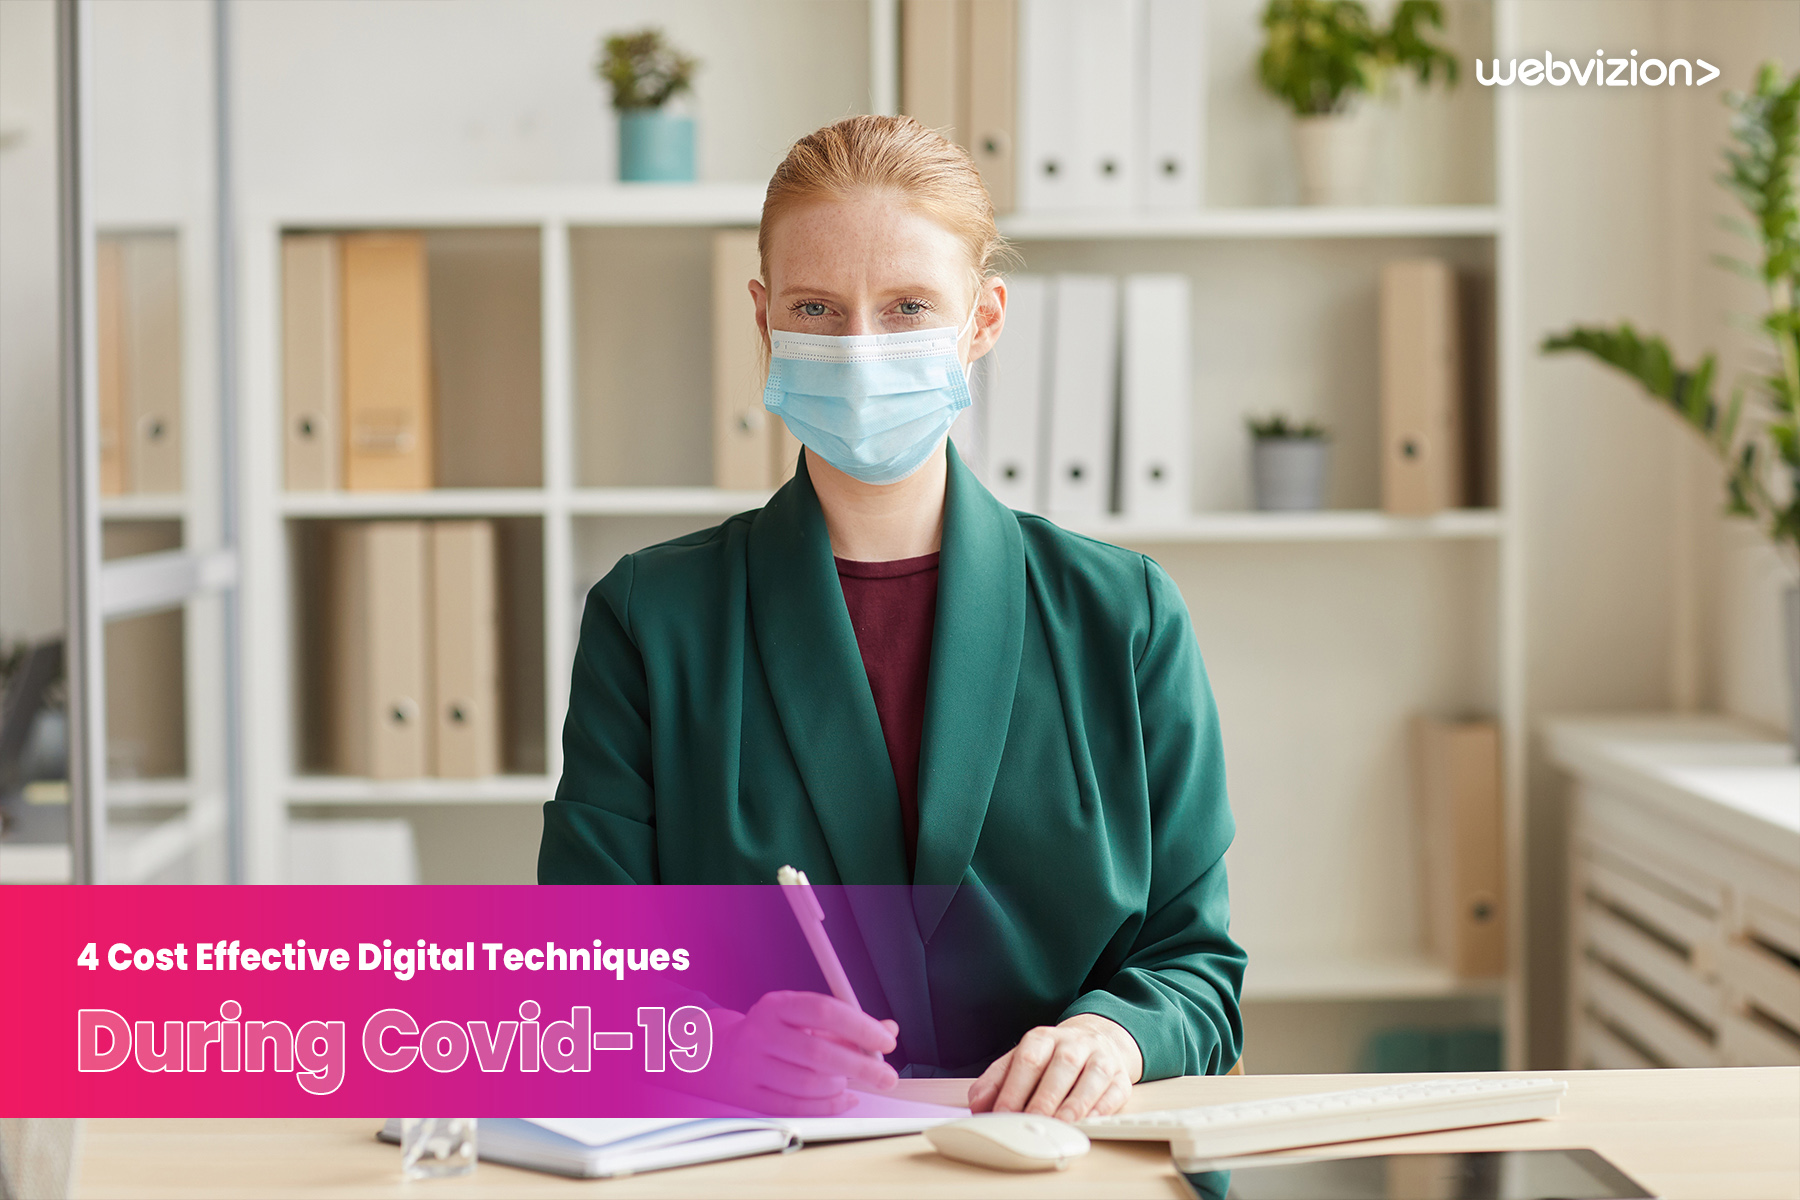 4 Cost Effective Digital Techniques During Covid-19